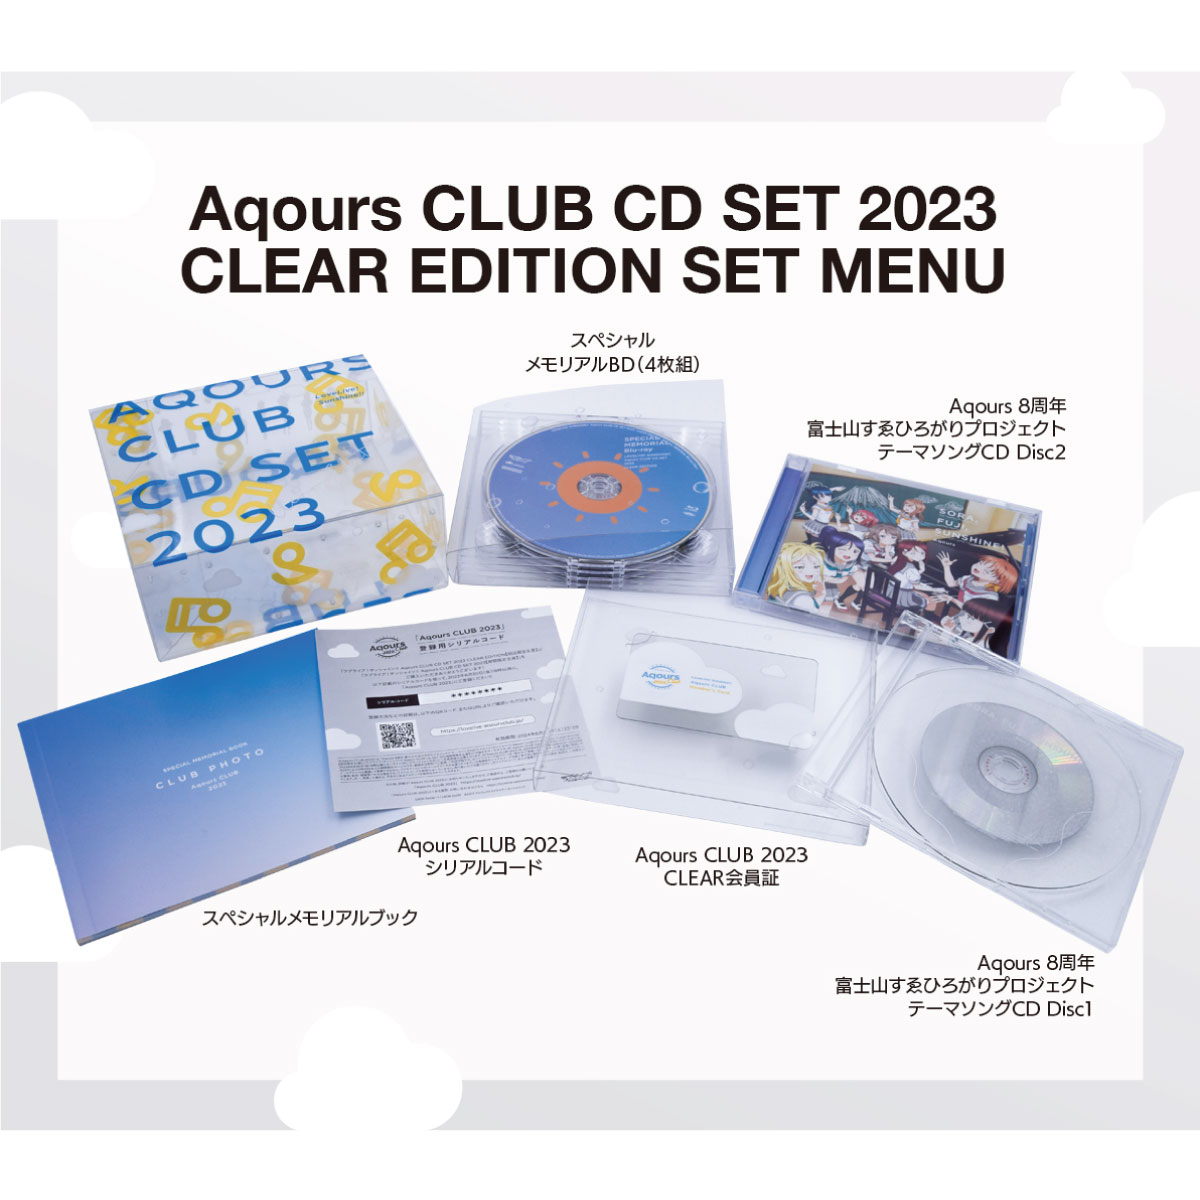 Aqours CLUB CD SET 2023 CLEAR EDITIONアニメ - アニメ